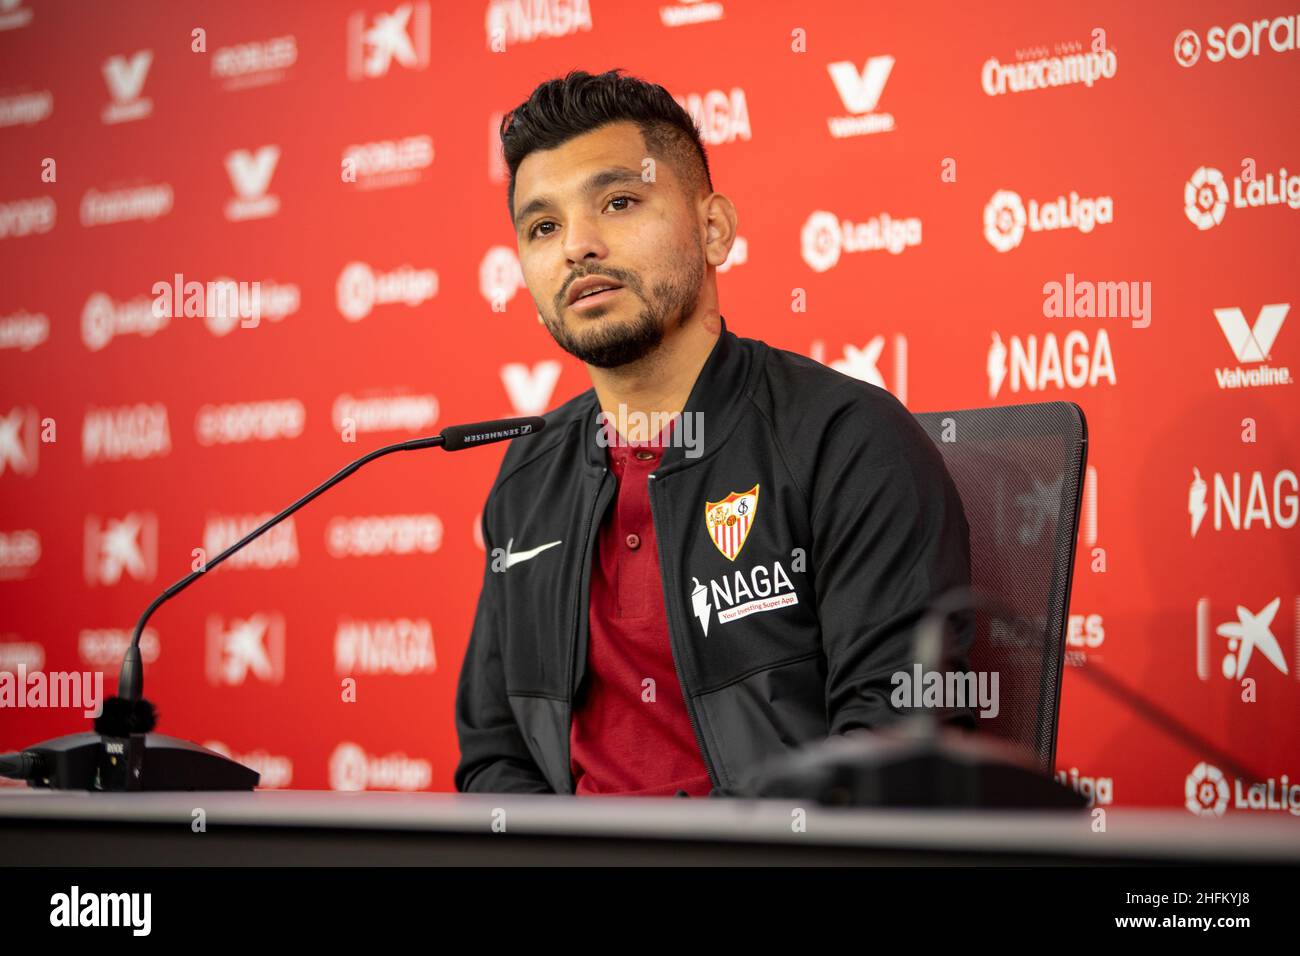 Seville, Spain. 17th, January 2022. Mexico international Jesus Tecatito Corona has signed for LaLiga club Sevilla from FC Porto and is presented at a press conference at the Ramon Sanchez-Pizjuan Stadium in Seville. (Photo credit: Mario Diaz Rasero - Gonzales Photo). Stock Photo